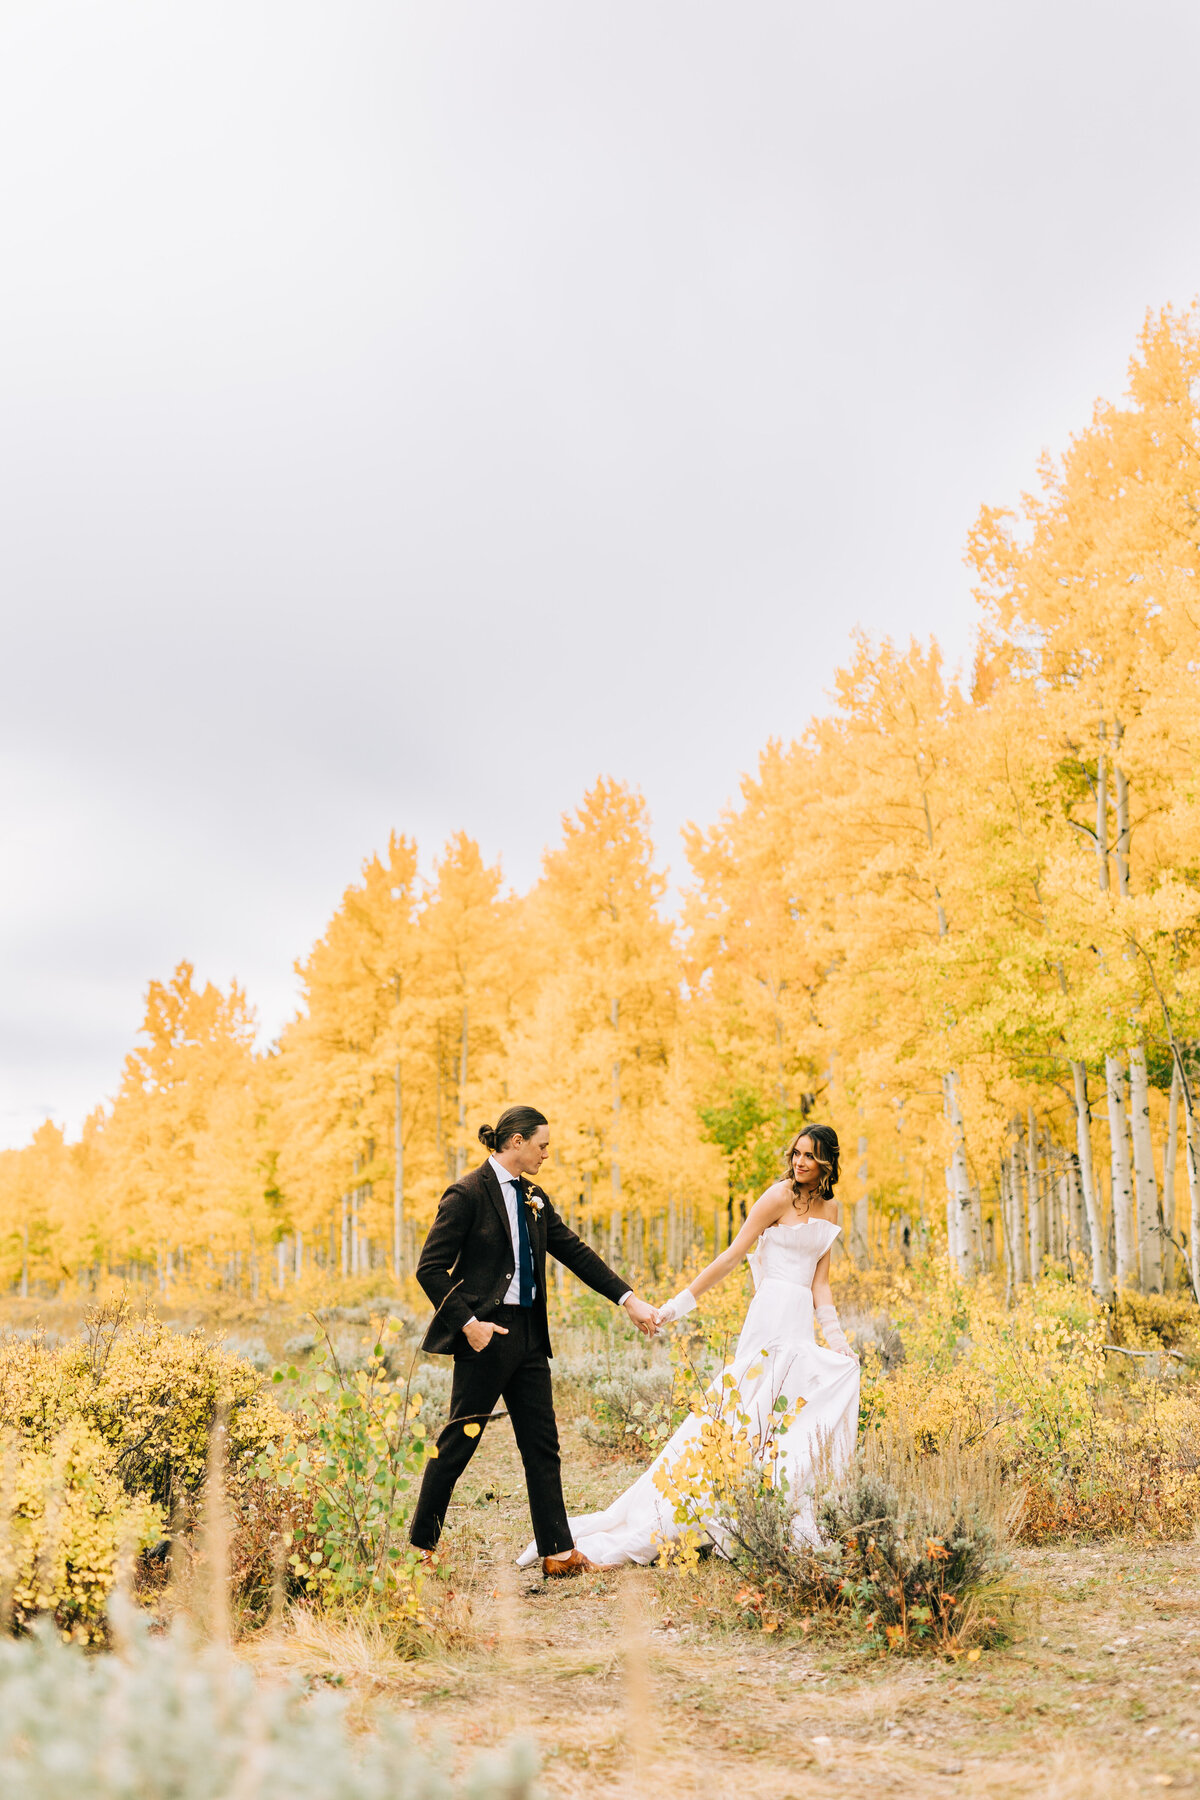 bride and groom walk hand in hand among fall foliage by winx photo tennessee wedding photographer